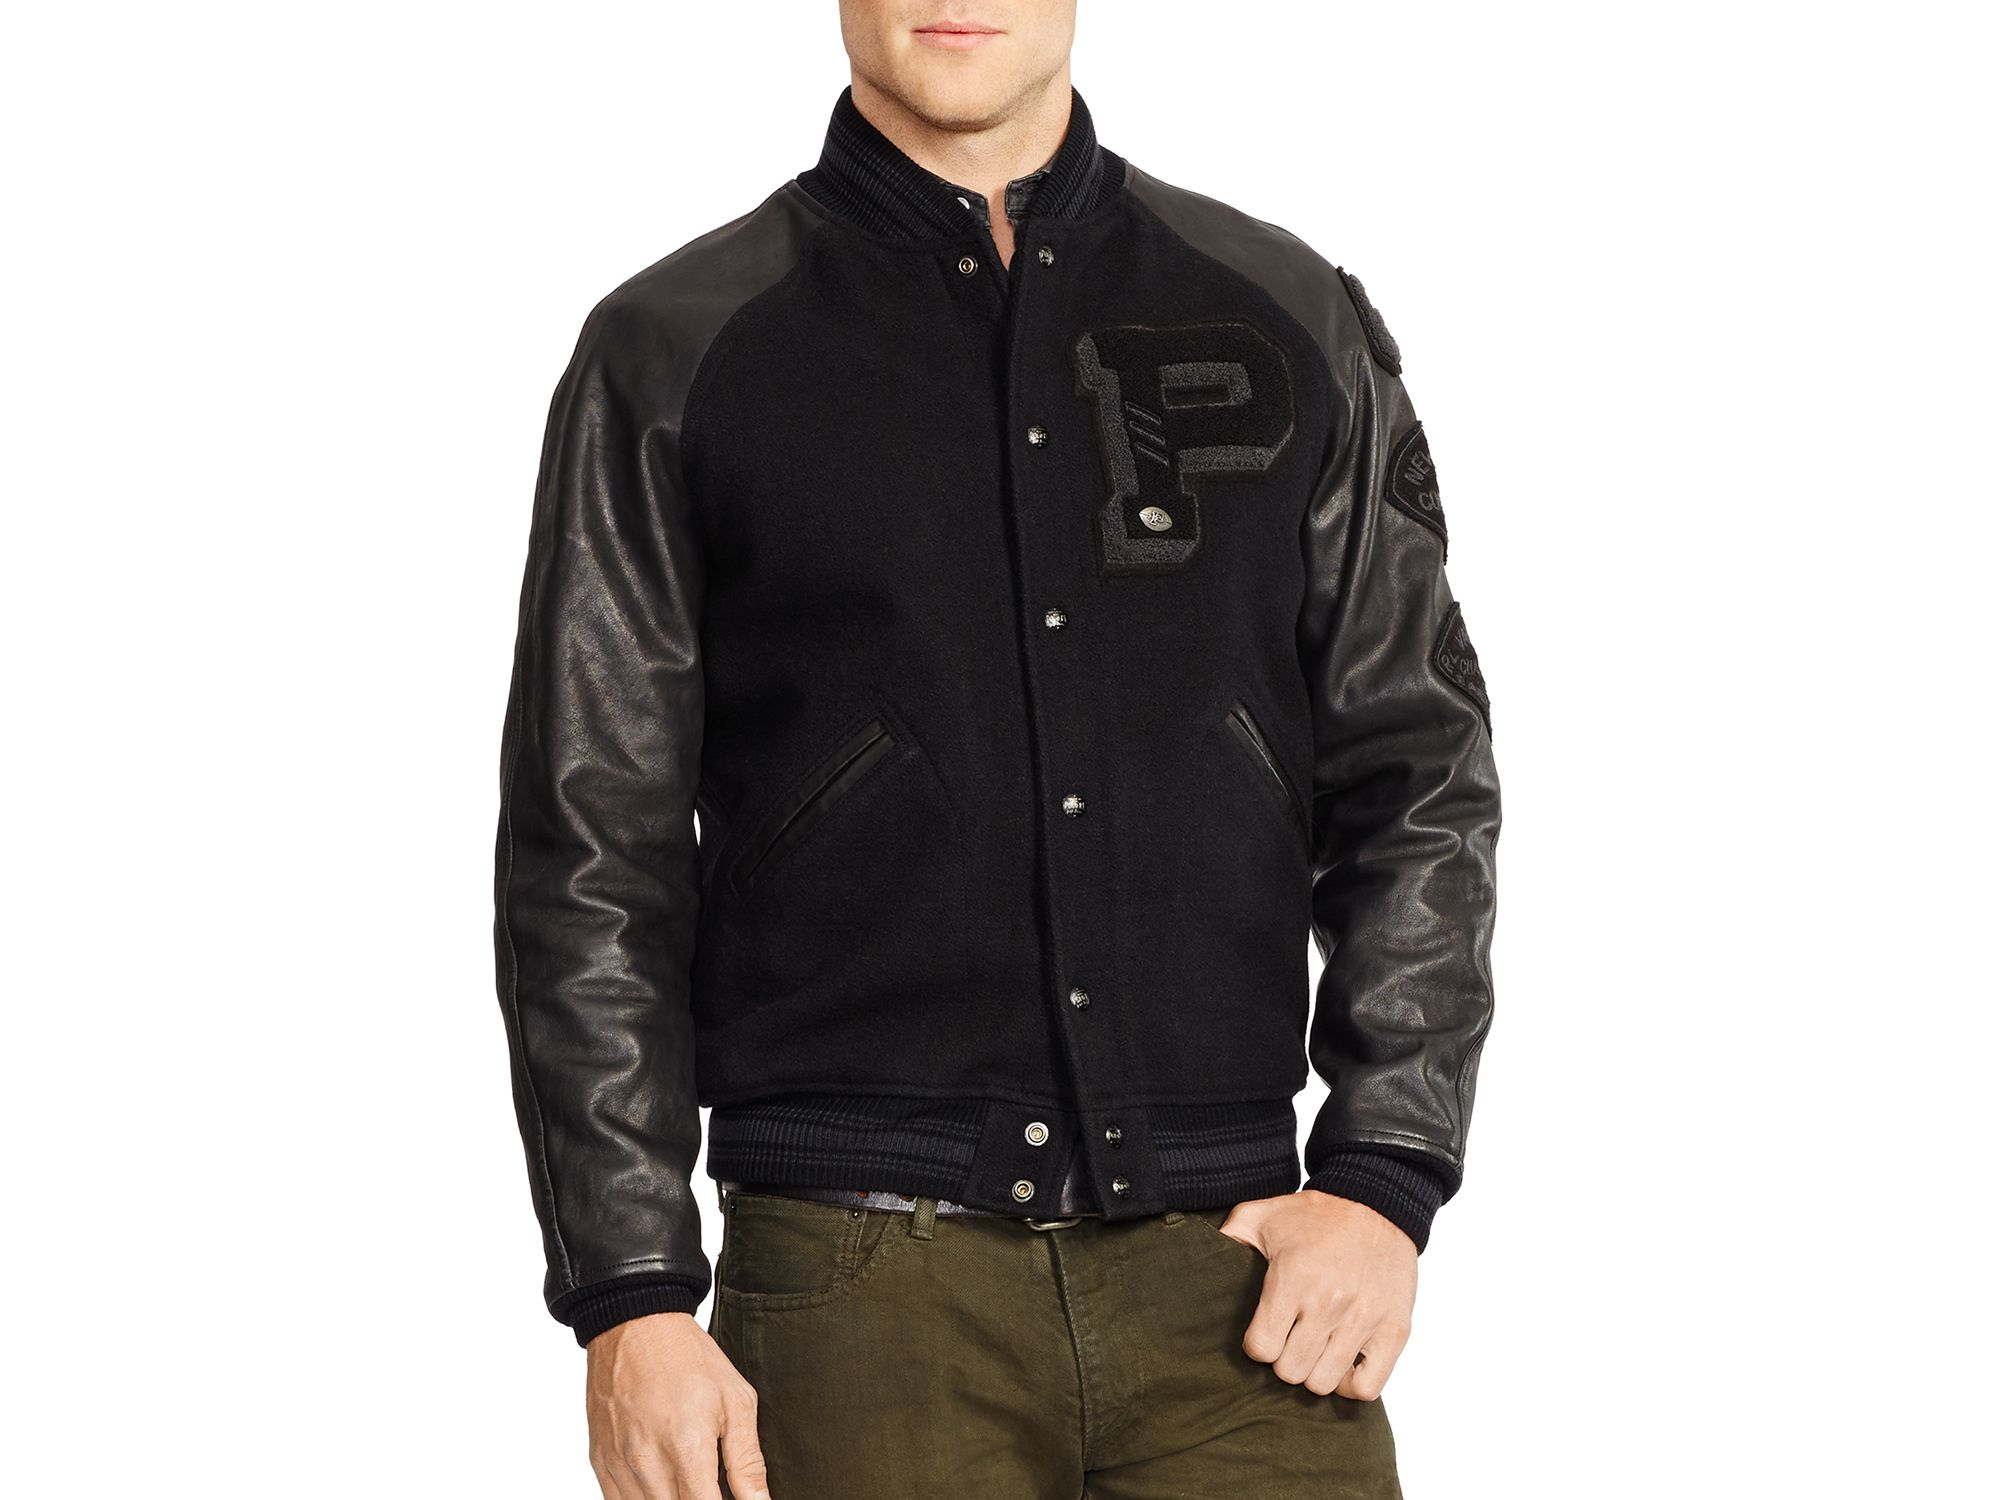 Ralph Lauren Polo Wool And Leather Varsity Jacket in Black for Men - Lyst